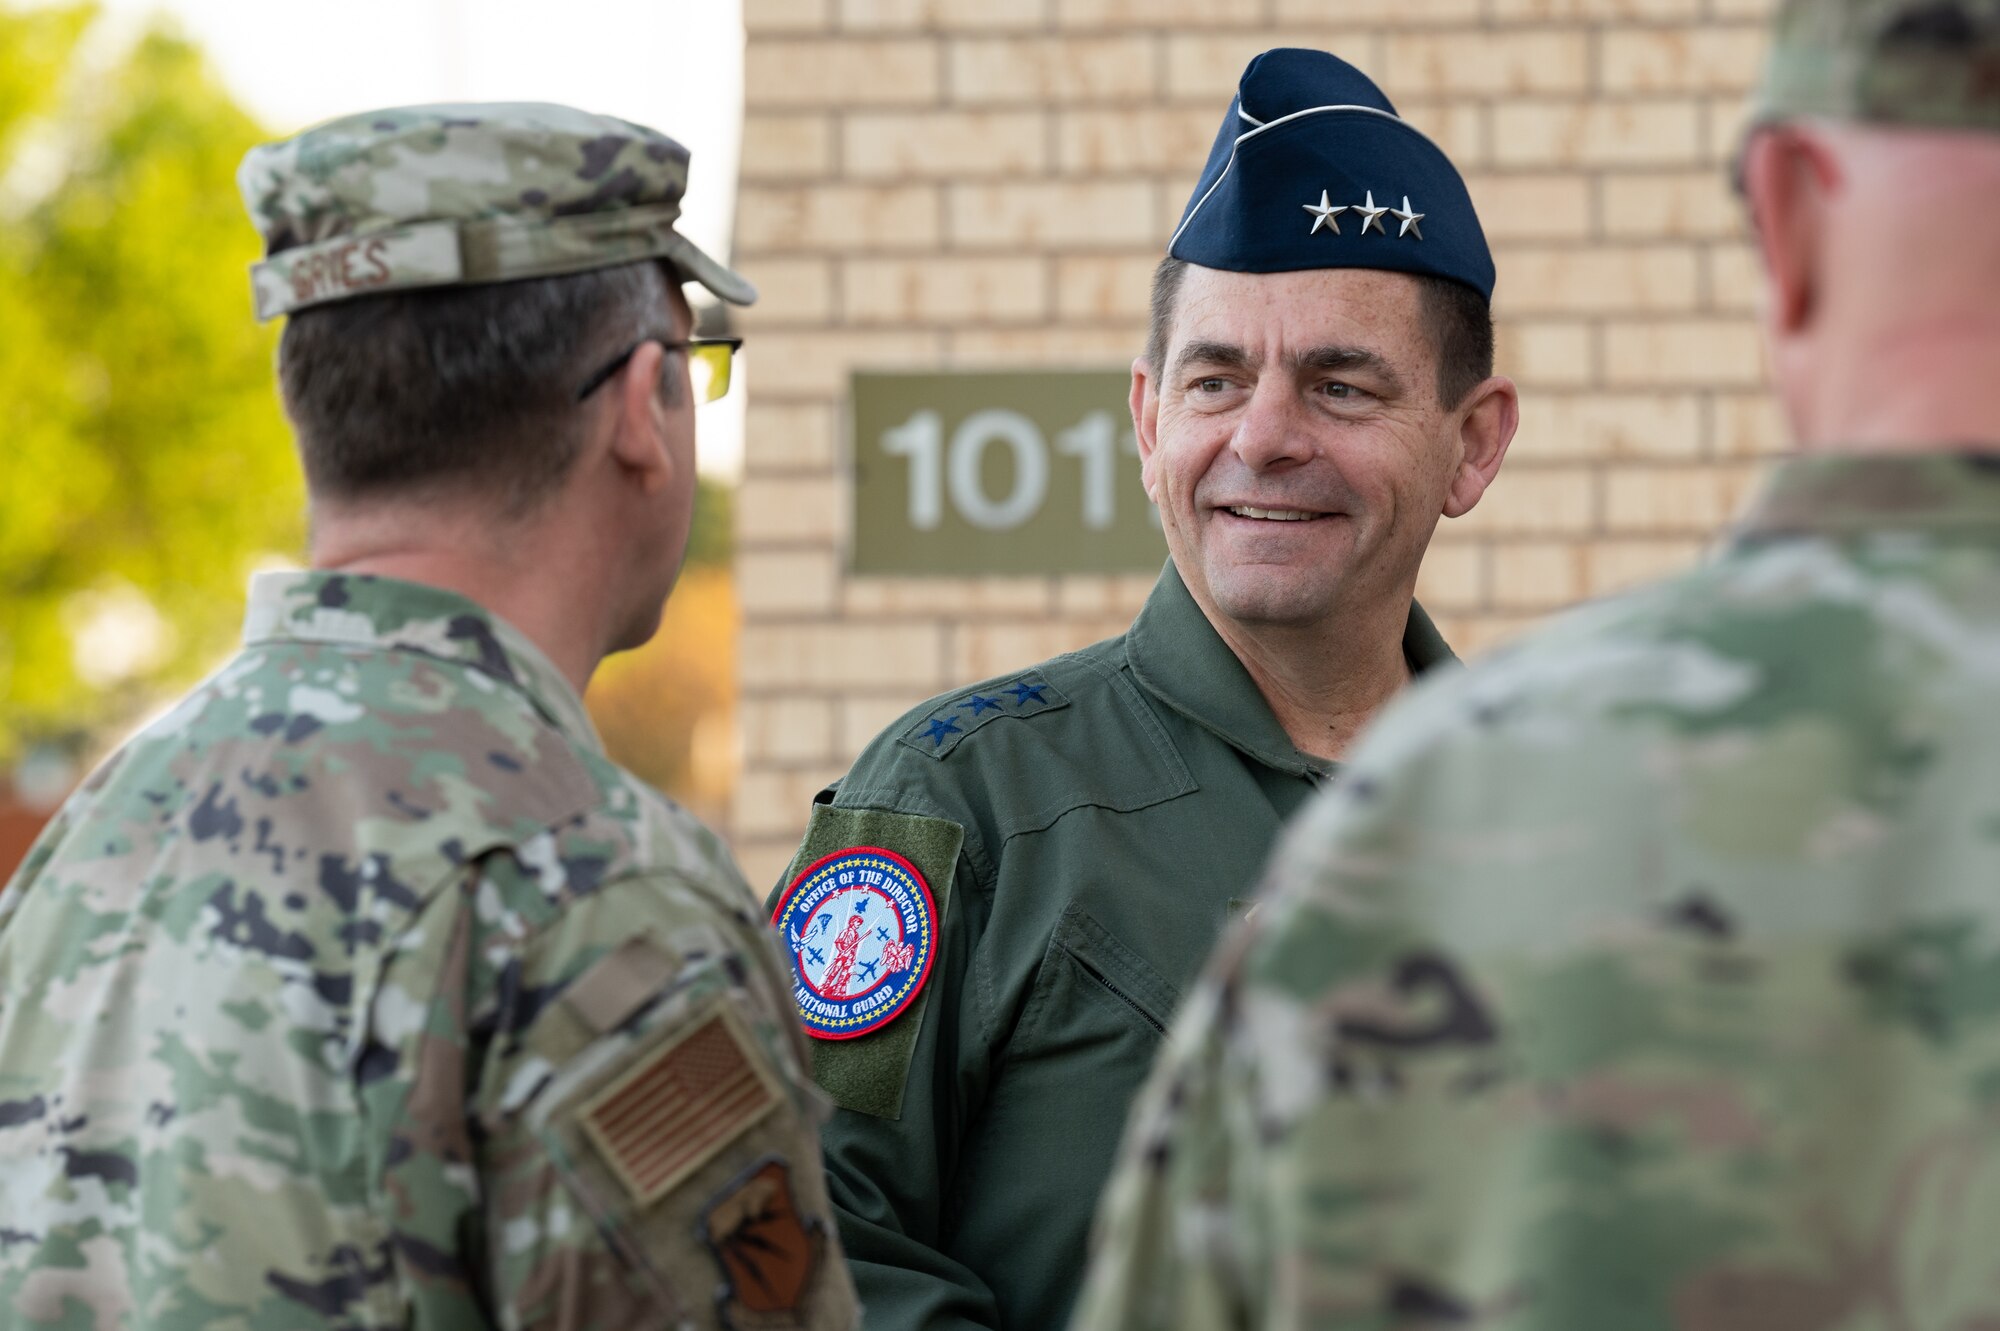 From left: U.S. Air Force Col. Christopher Gries, commander, 137th Special Operations Wing (SOW), Oklahoma National Guard (OKNG), speaks to Lt. Gen. Michael A. Loh, director, Air National Guard (ANG), at Will Rogers ANG Base in Oklahoma City, April 14, 2022.